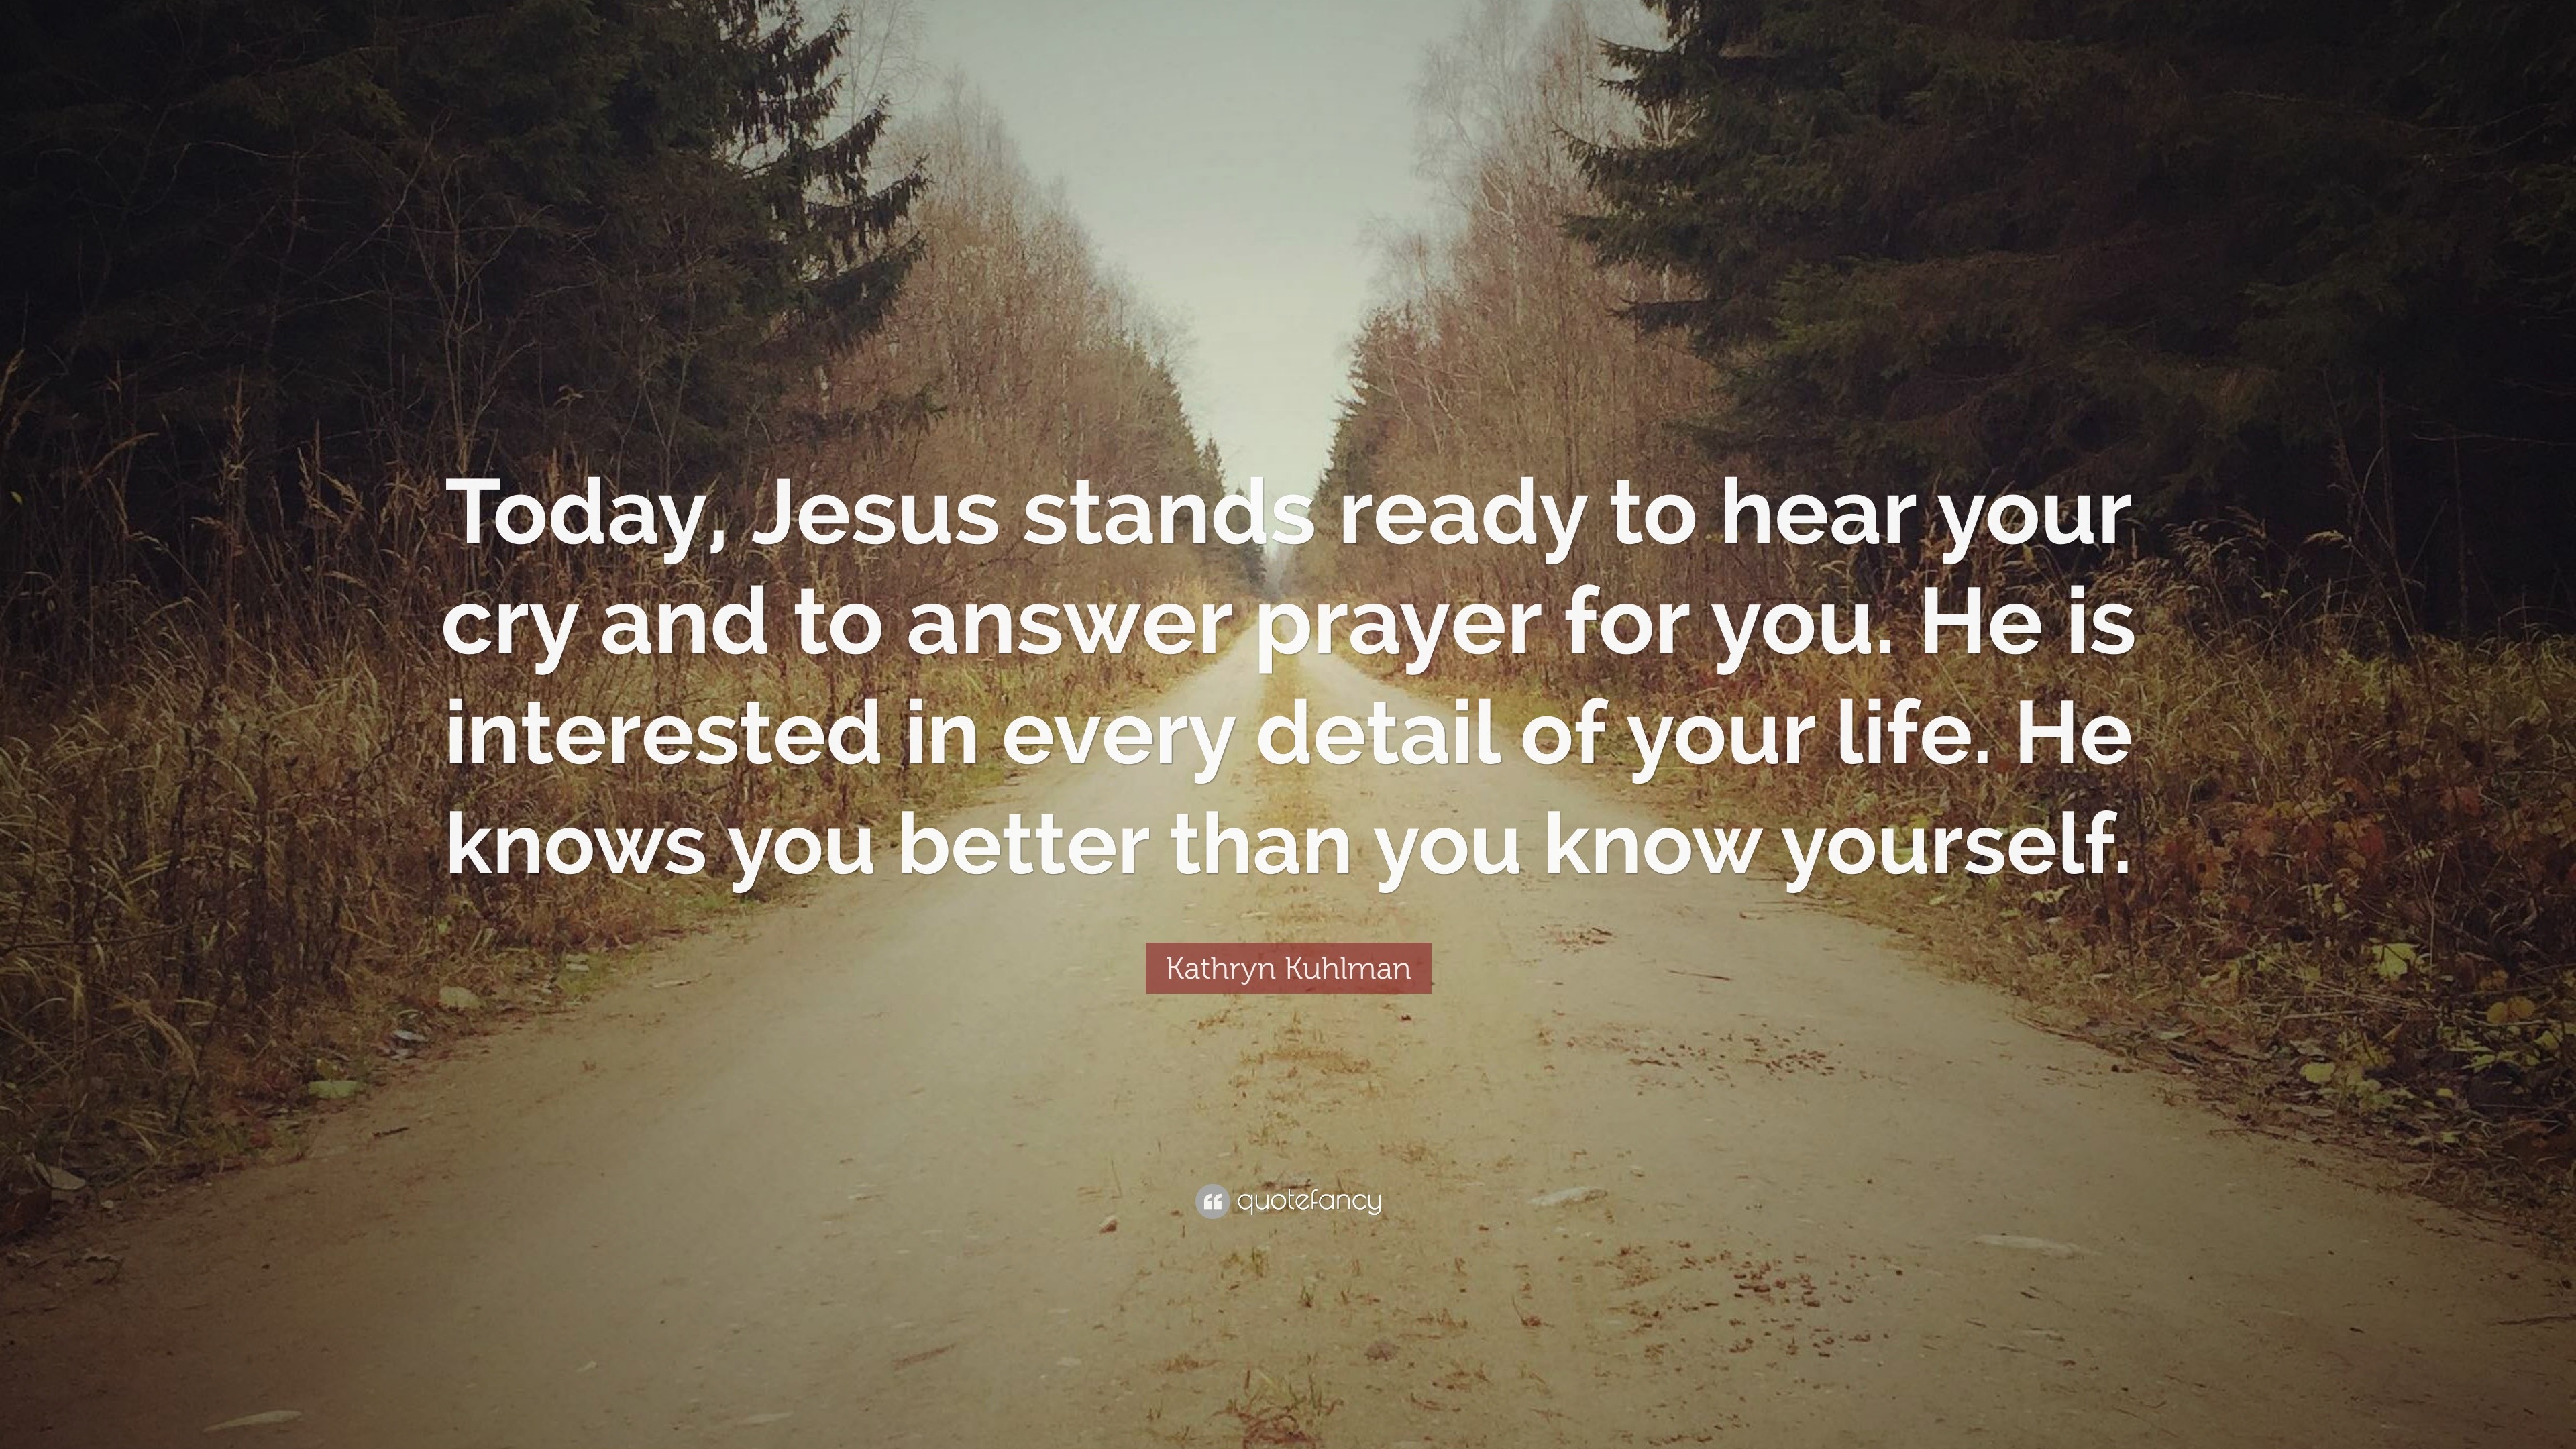 Kathryn Kuhlman Quote “Today, Jesus stands ready to hear your cry and